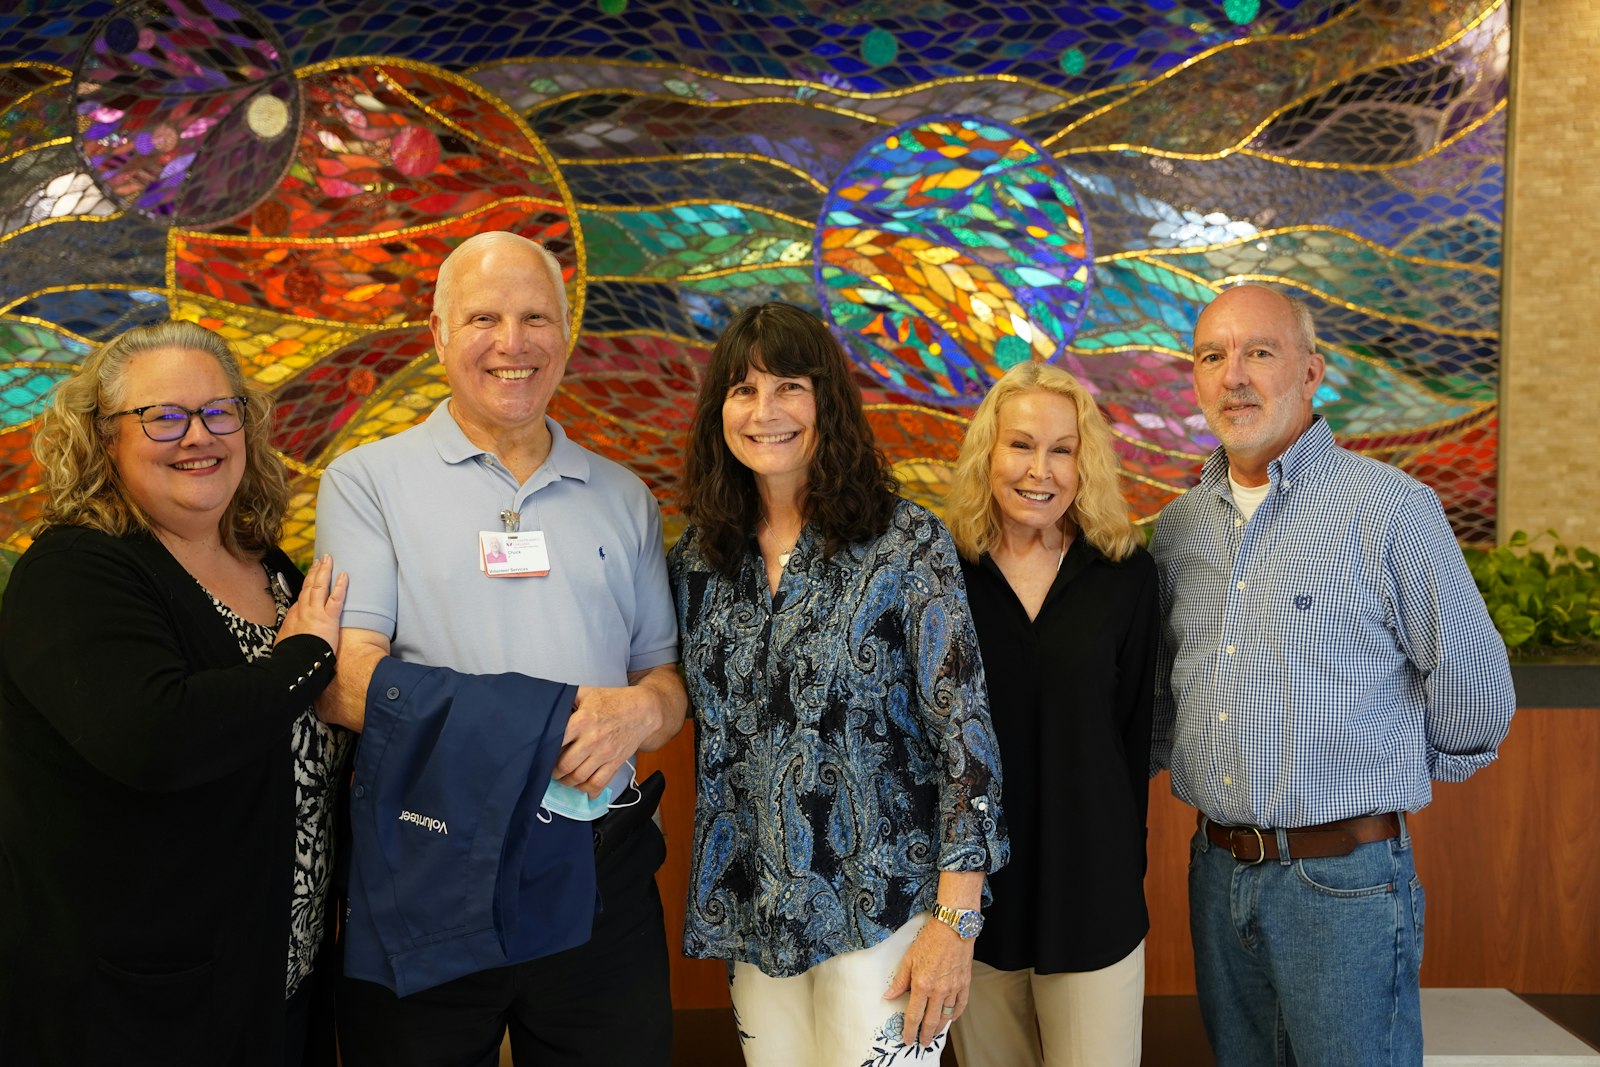 Barbara Stephen, bereavement specialist in the volunteer department at Trinity Health Oakland and Trinity Health Livonia, poses for a photo with No One Dies Alone volunteers, Chuck Pokriefka, Lisa Marie Blanek, Susan Abentrod and Joe Fugitt.